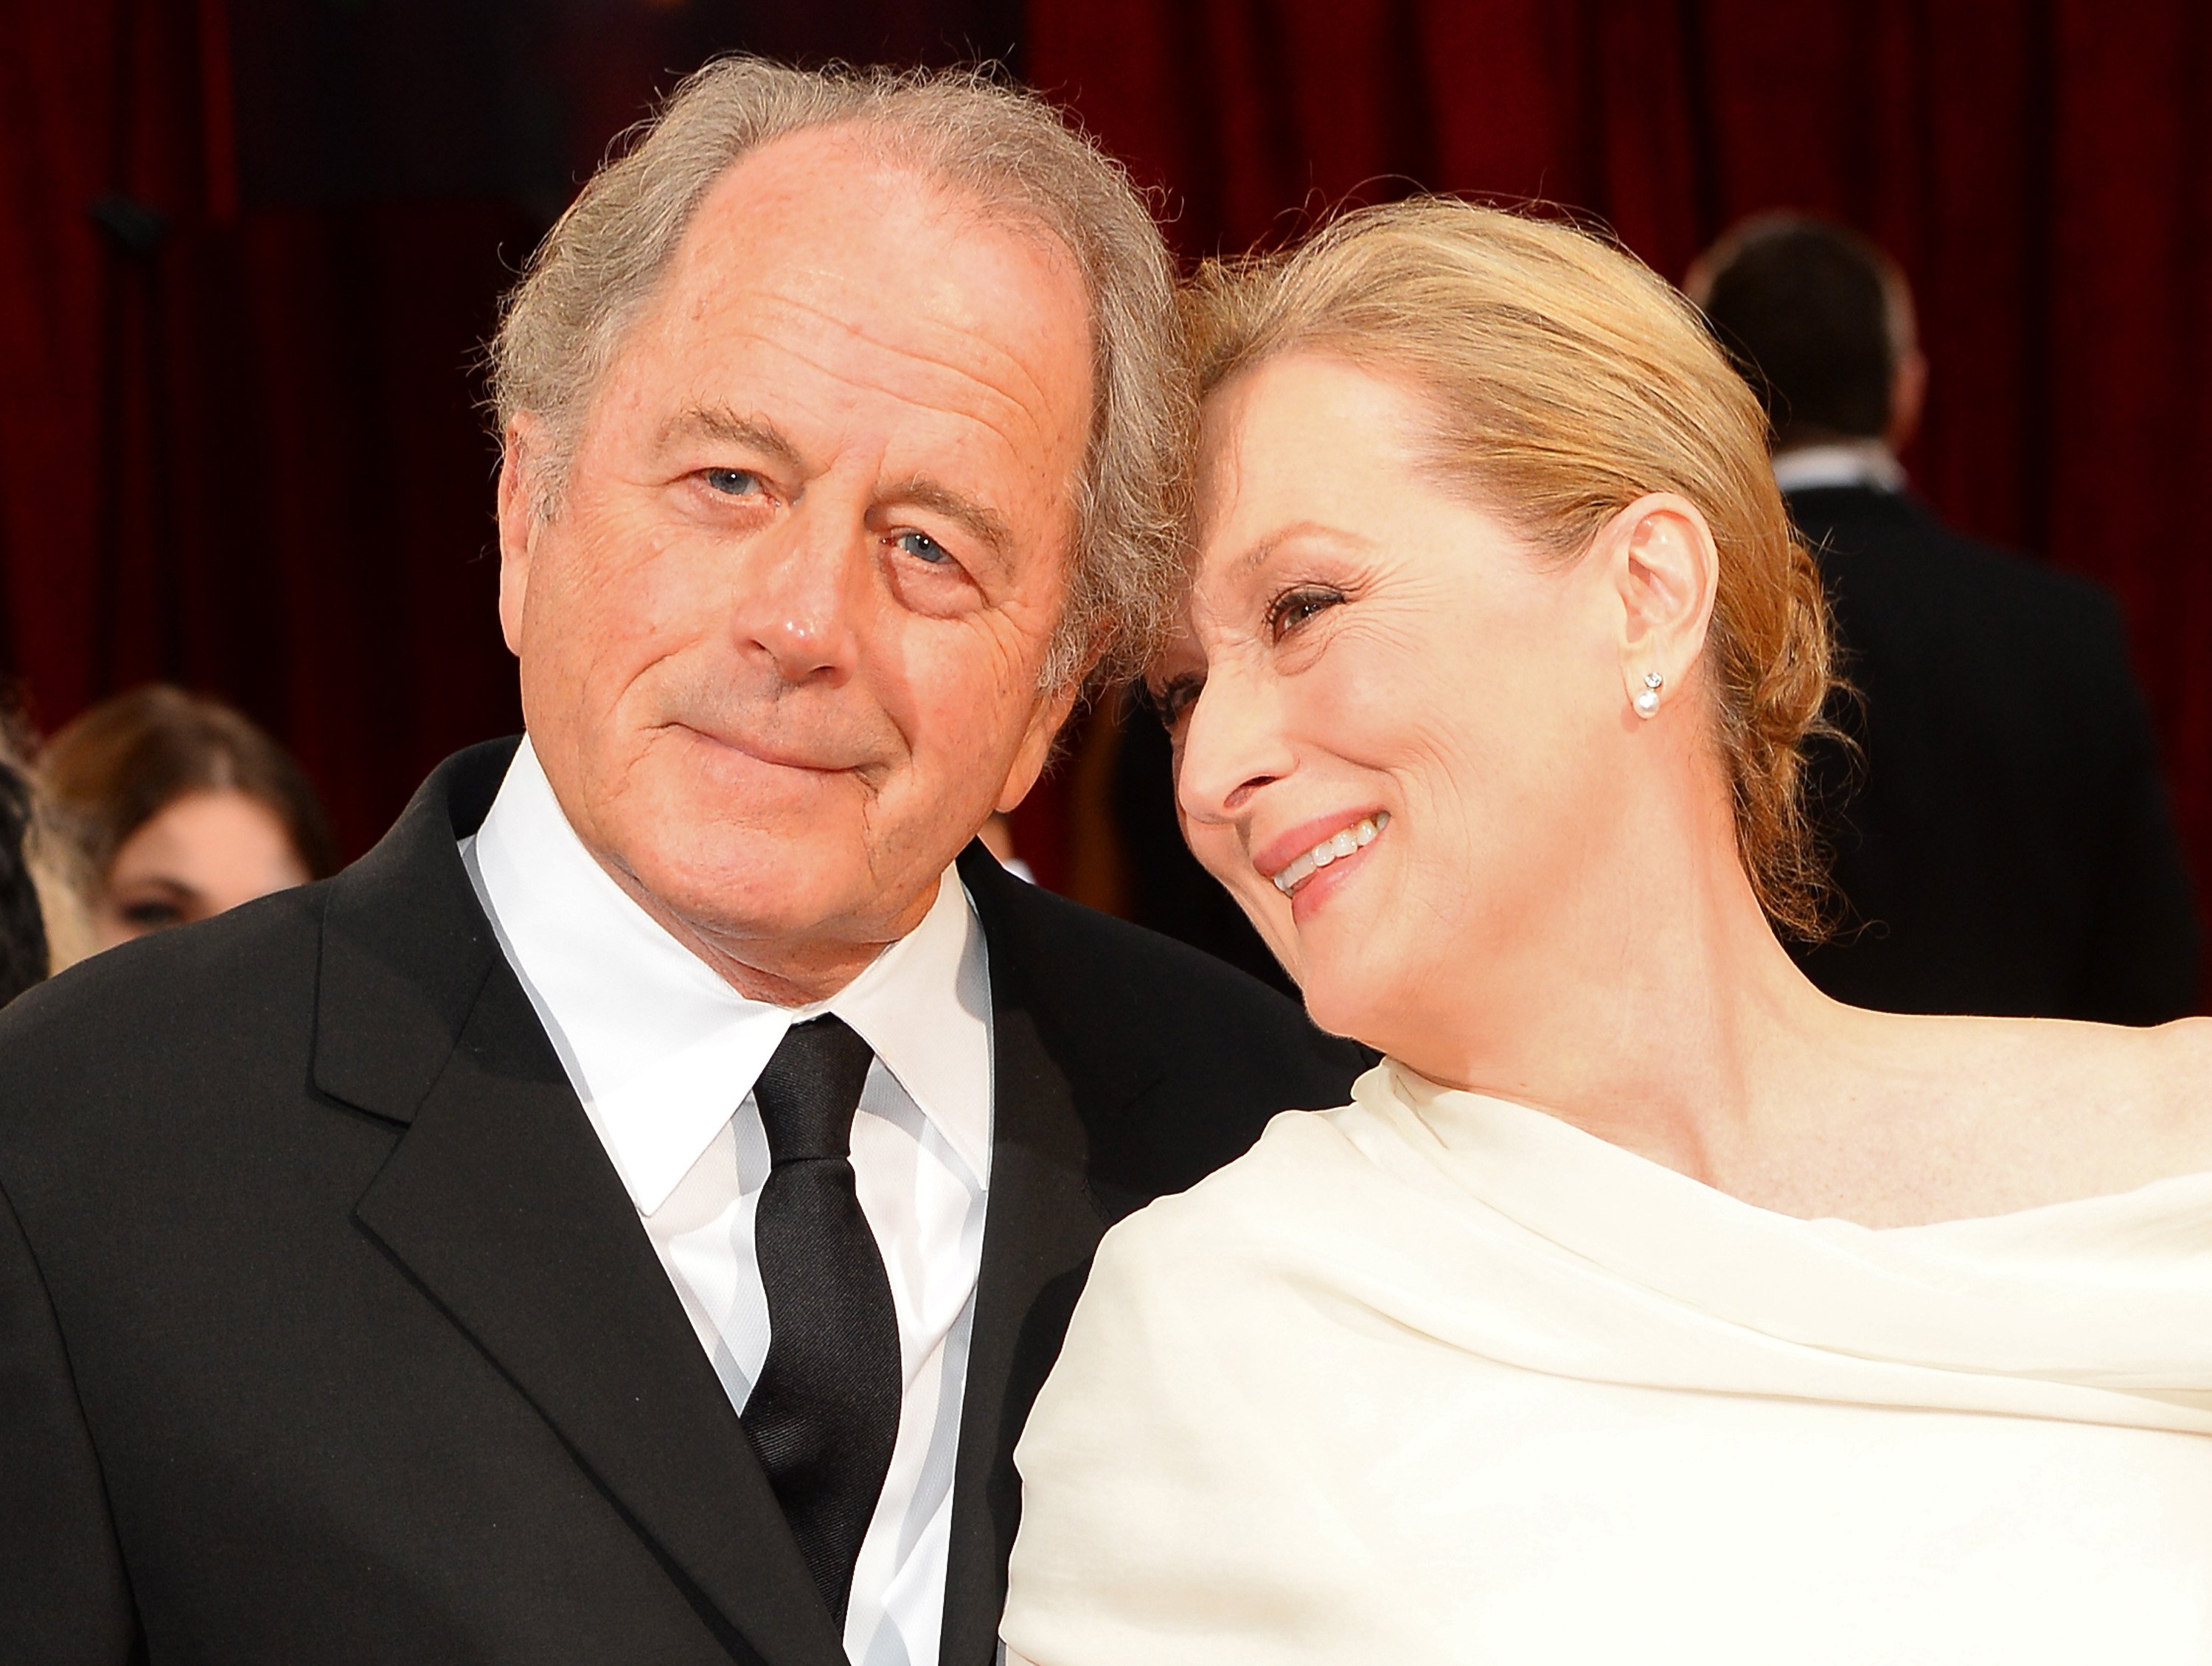 Meryl Streep and Don Gummer at the Oscars on March 2, 2014 | Source: Getty Images